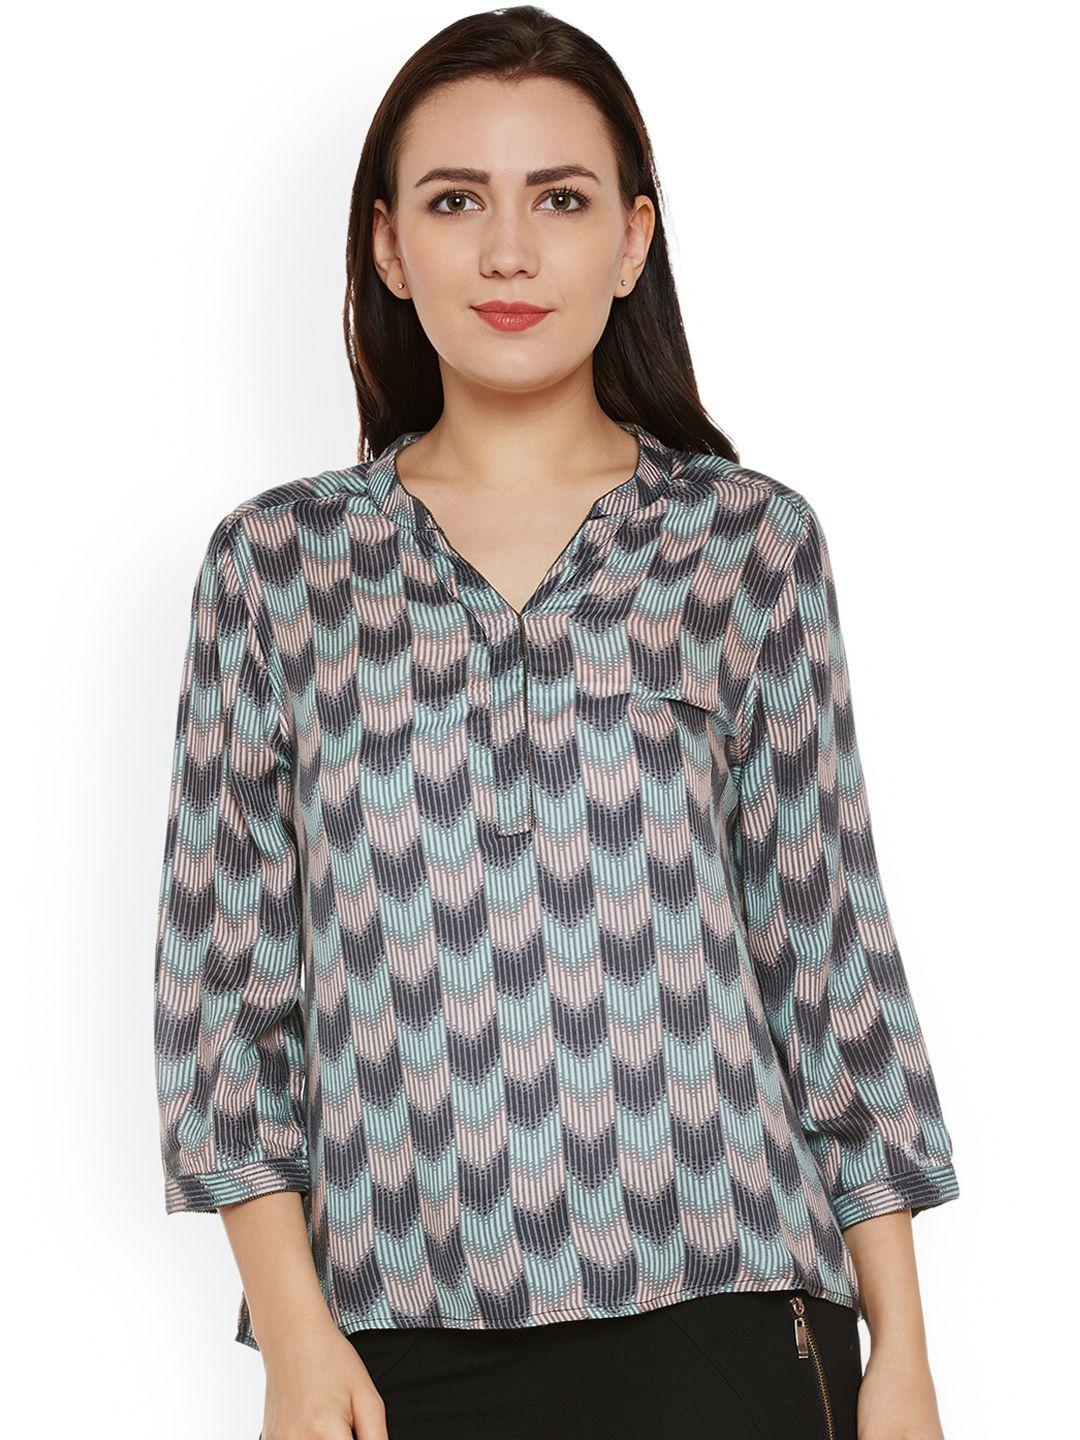 oxolloxo women charcoal grey & peach-coloured printed top